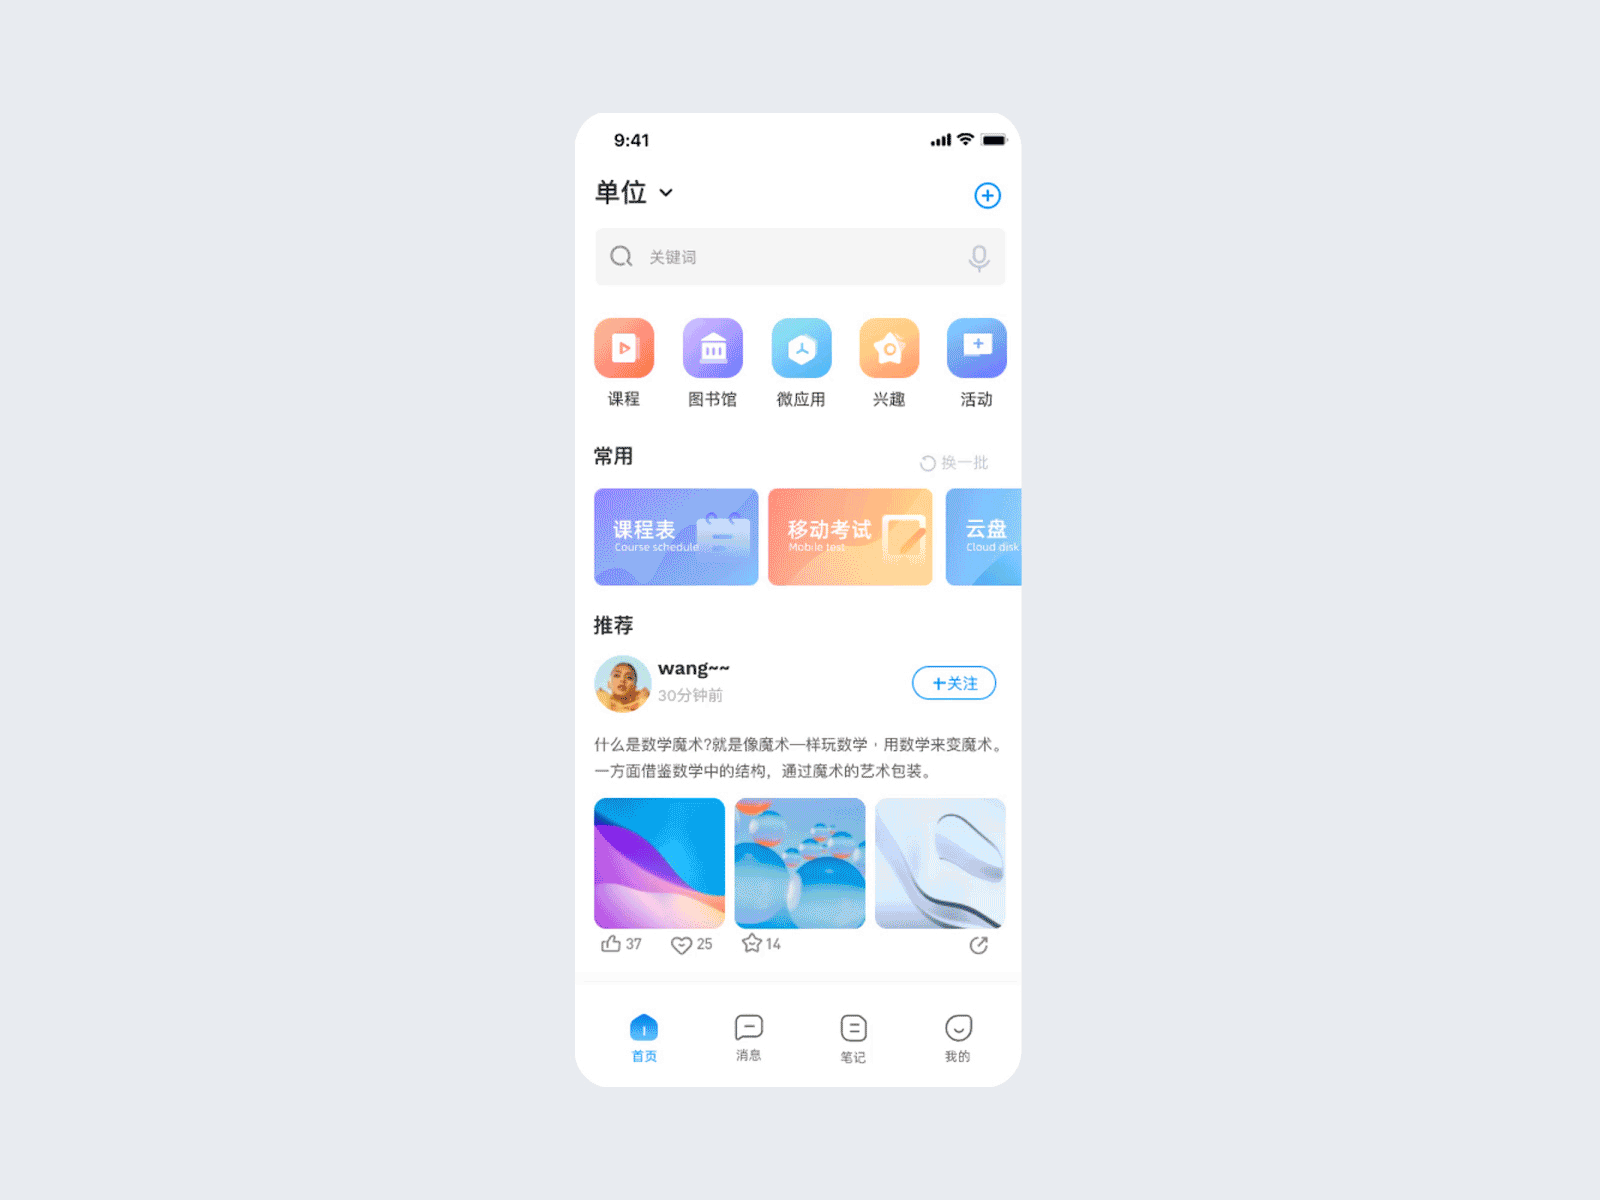 Tab Interaction for APPS